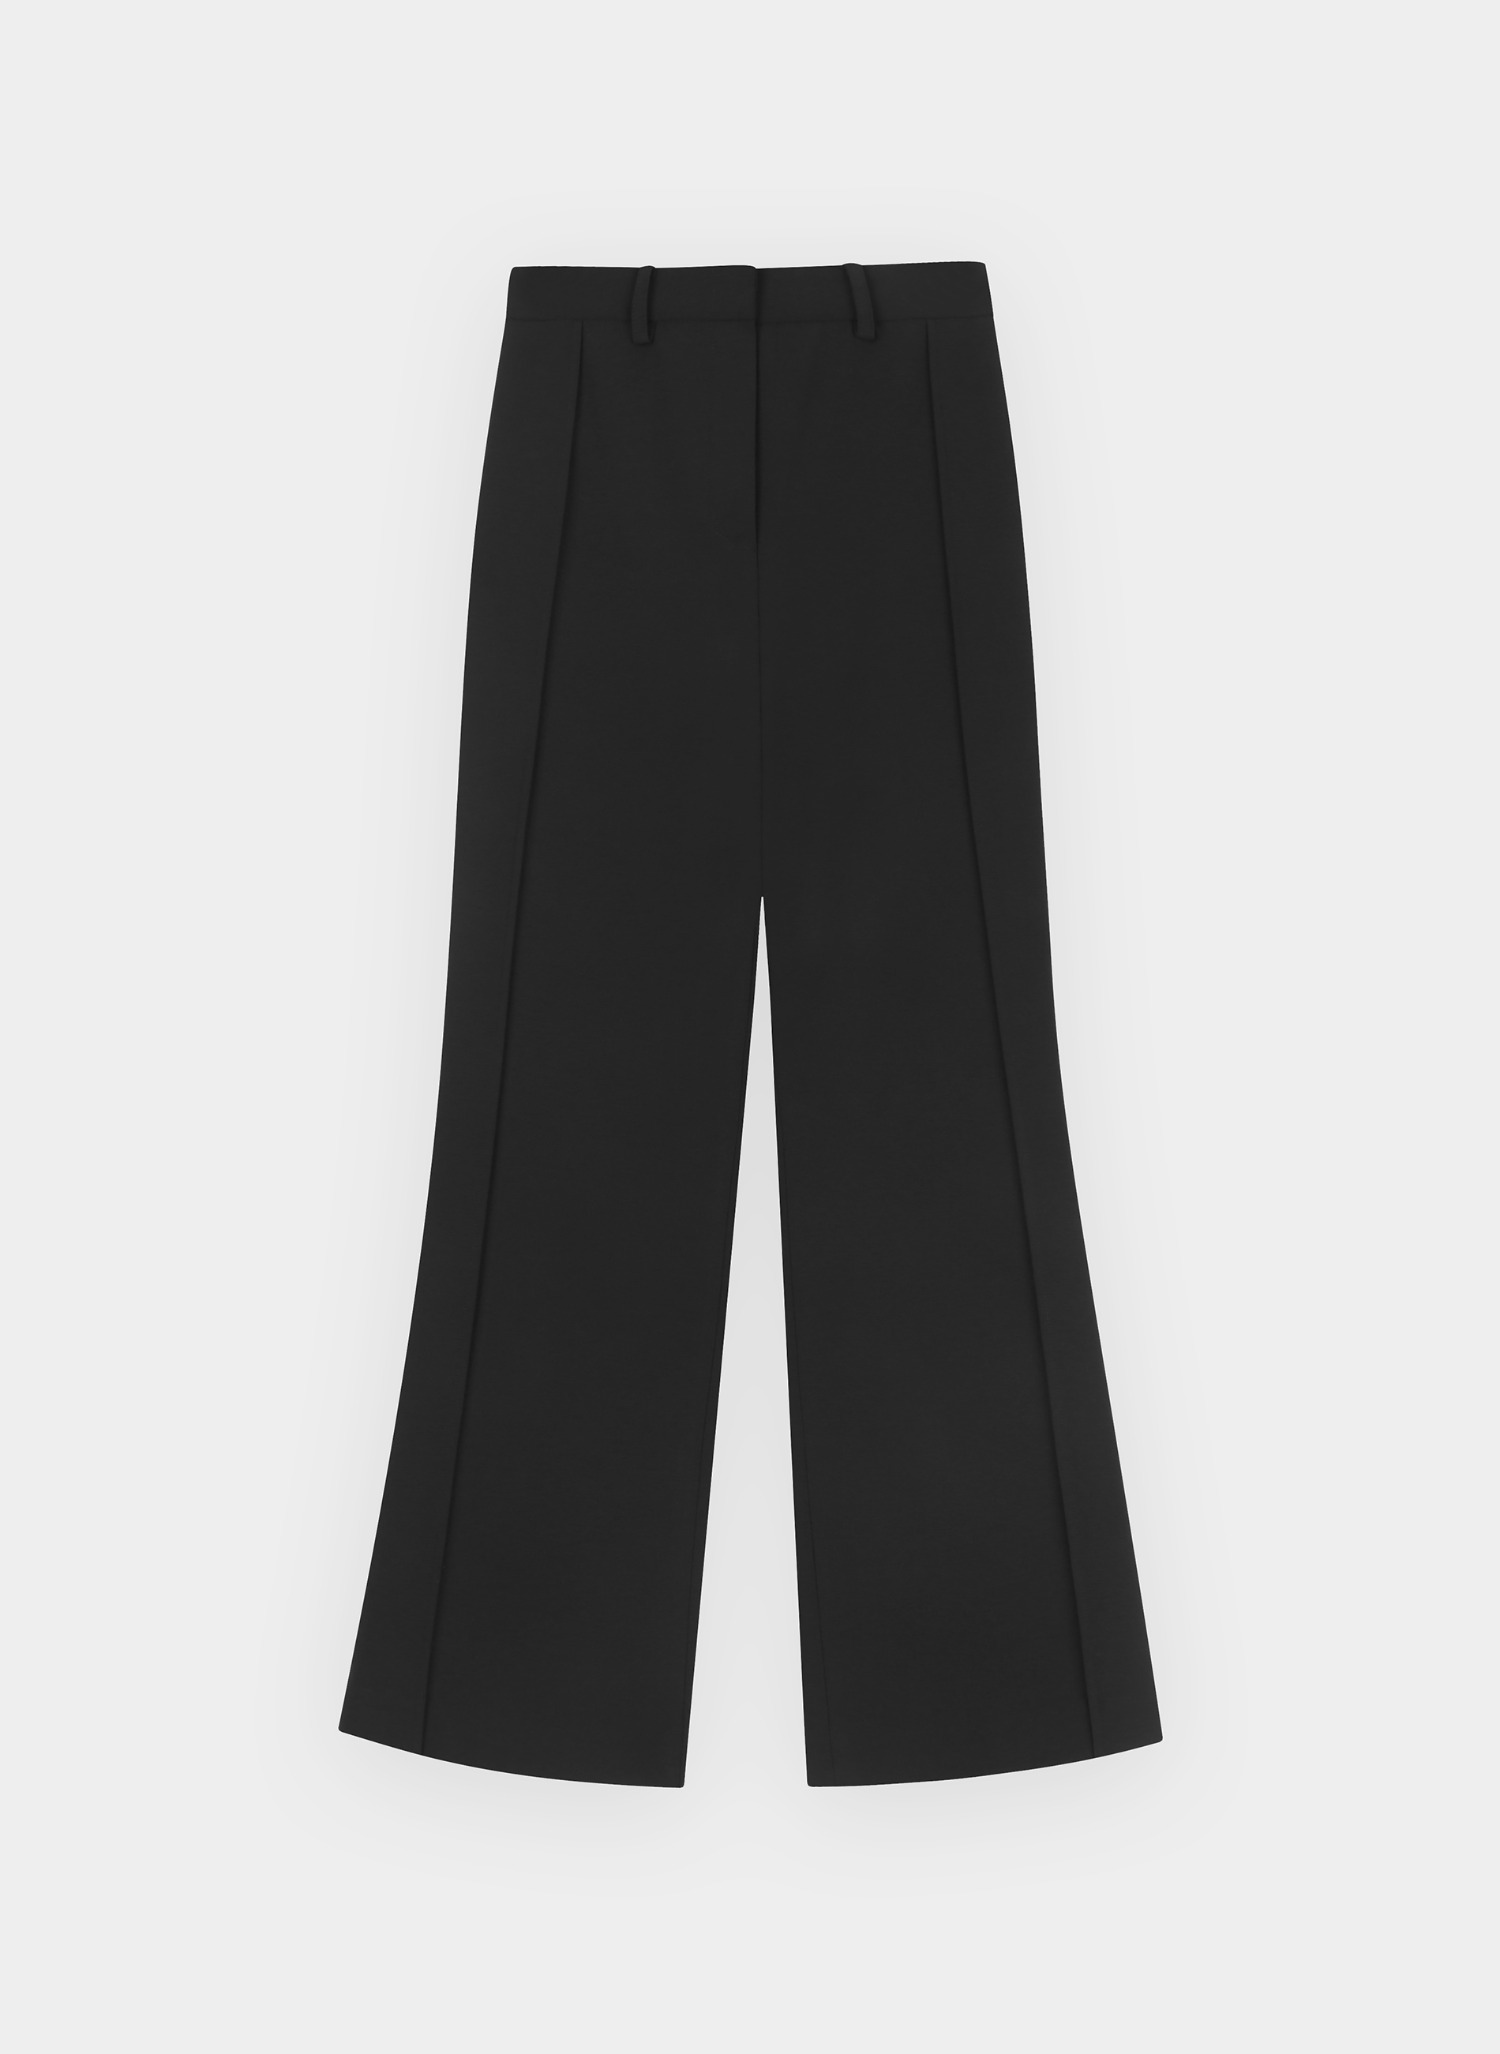 Lined Boots Cut Trousers Black